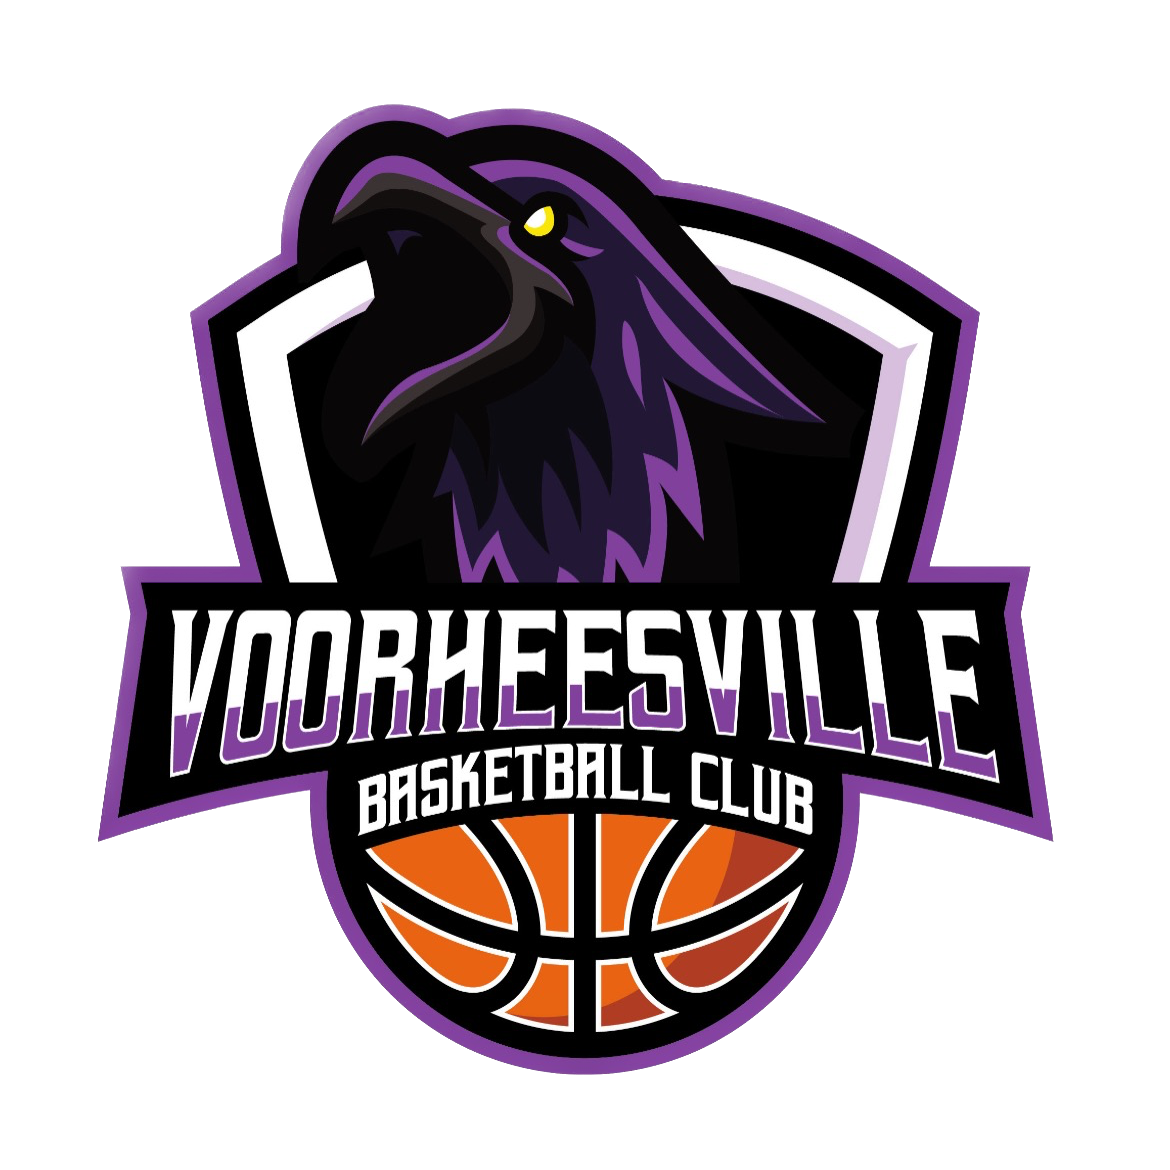 Voorheesville Basketball Club Logo copy Background Removed